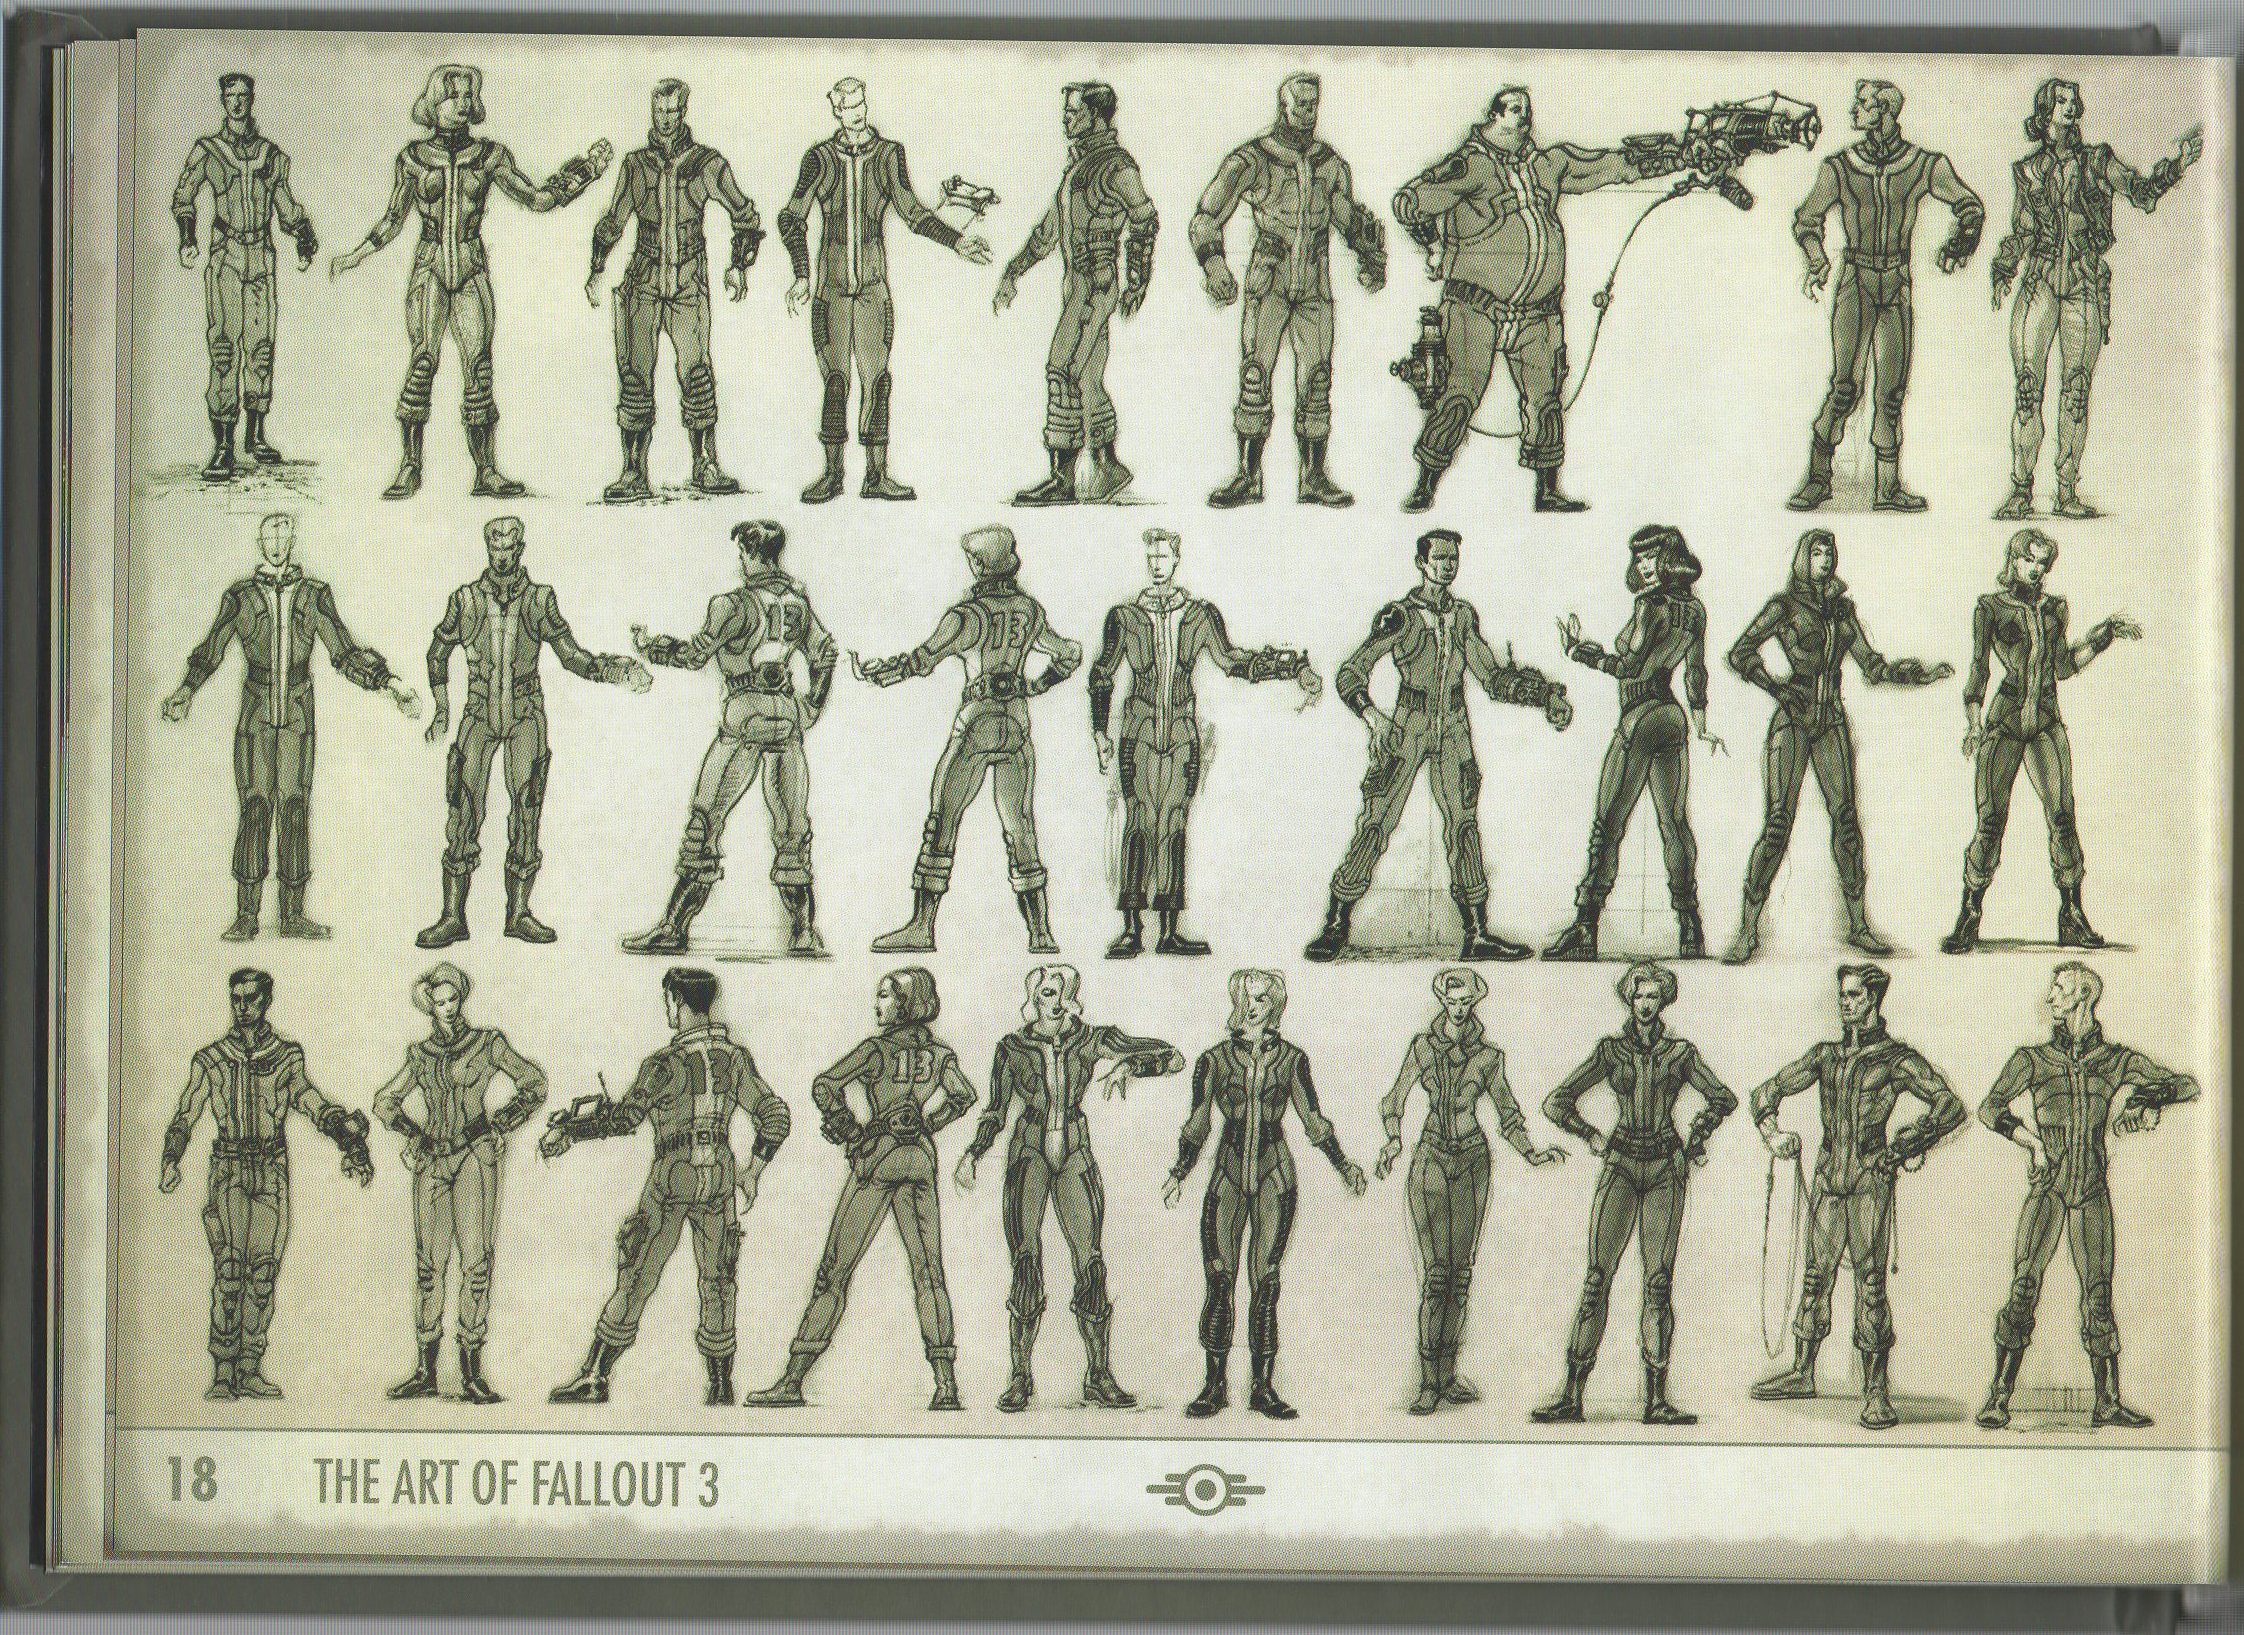 The art of fallout 4 official artbook фото 46